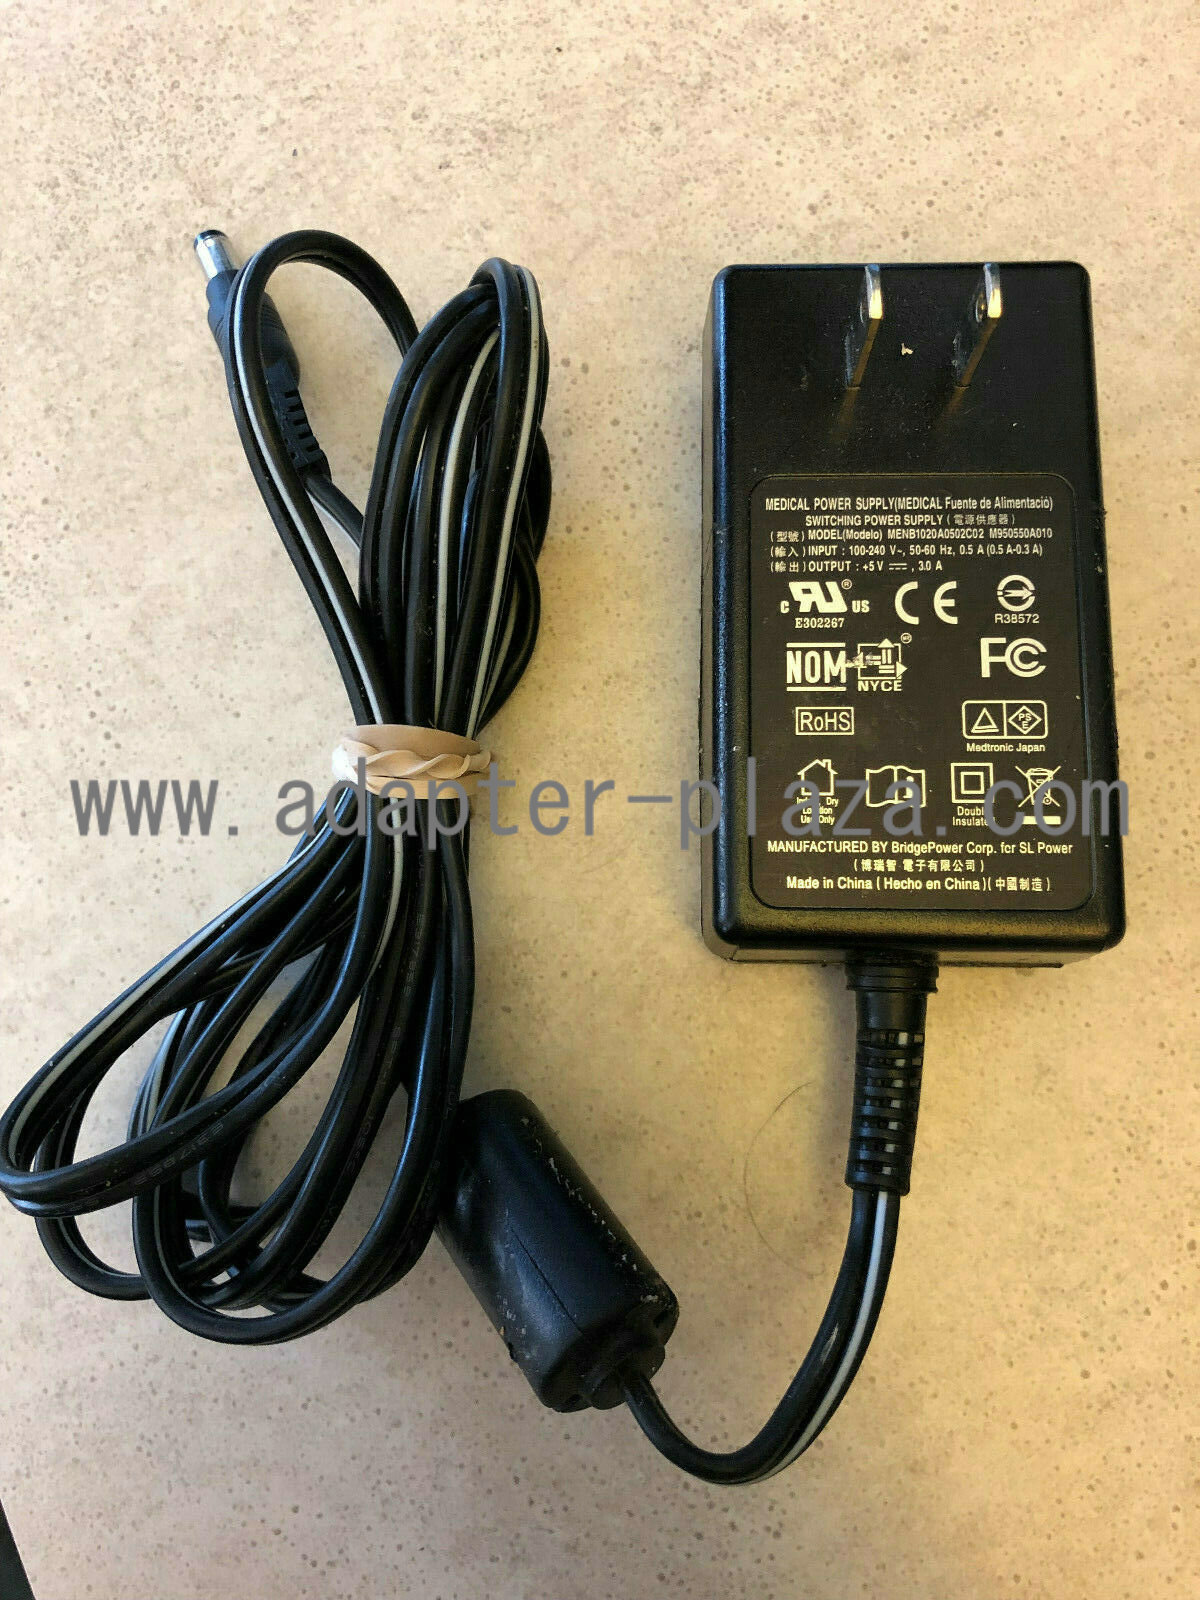 New AULT 5v 3a MENB1020A0502C02 M950550A010 Medical Power Supply AC Adapter